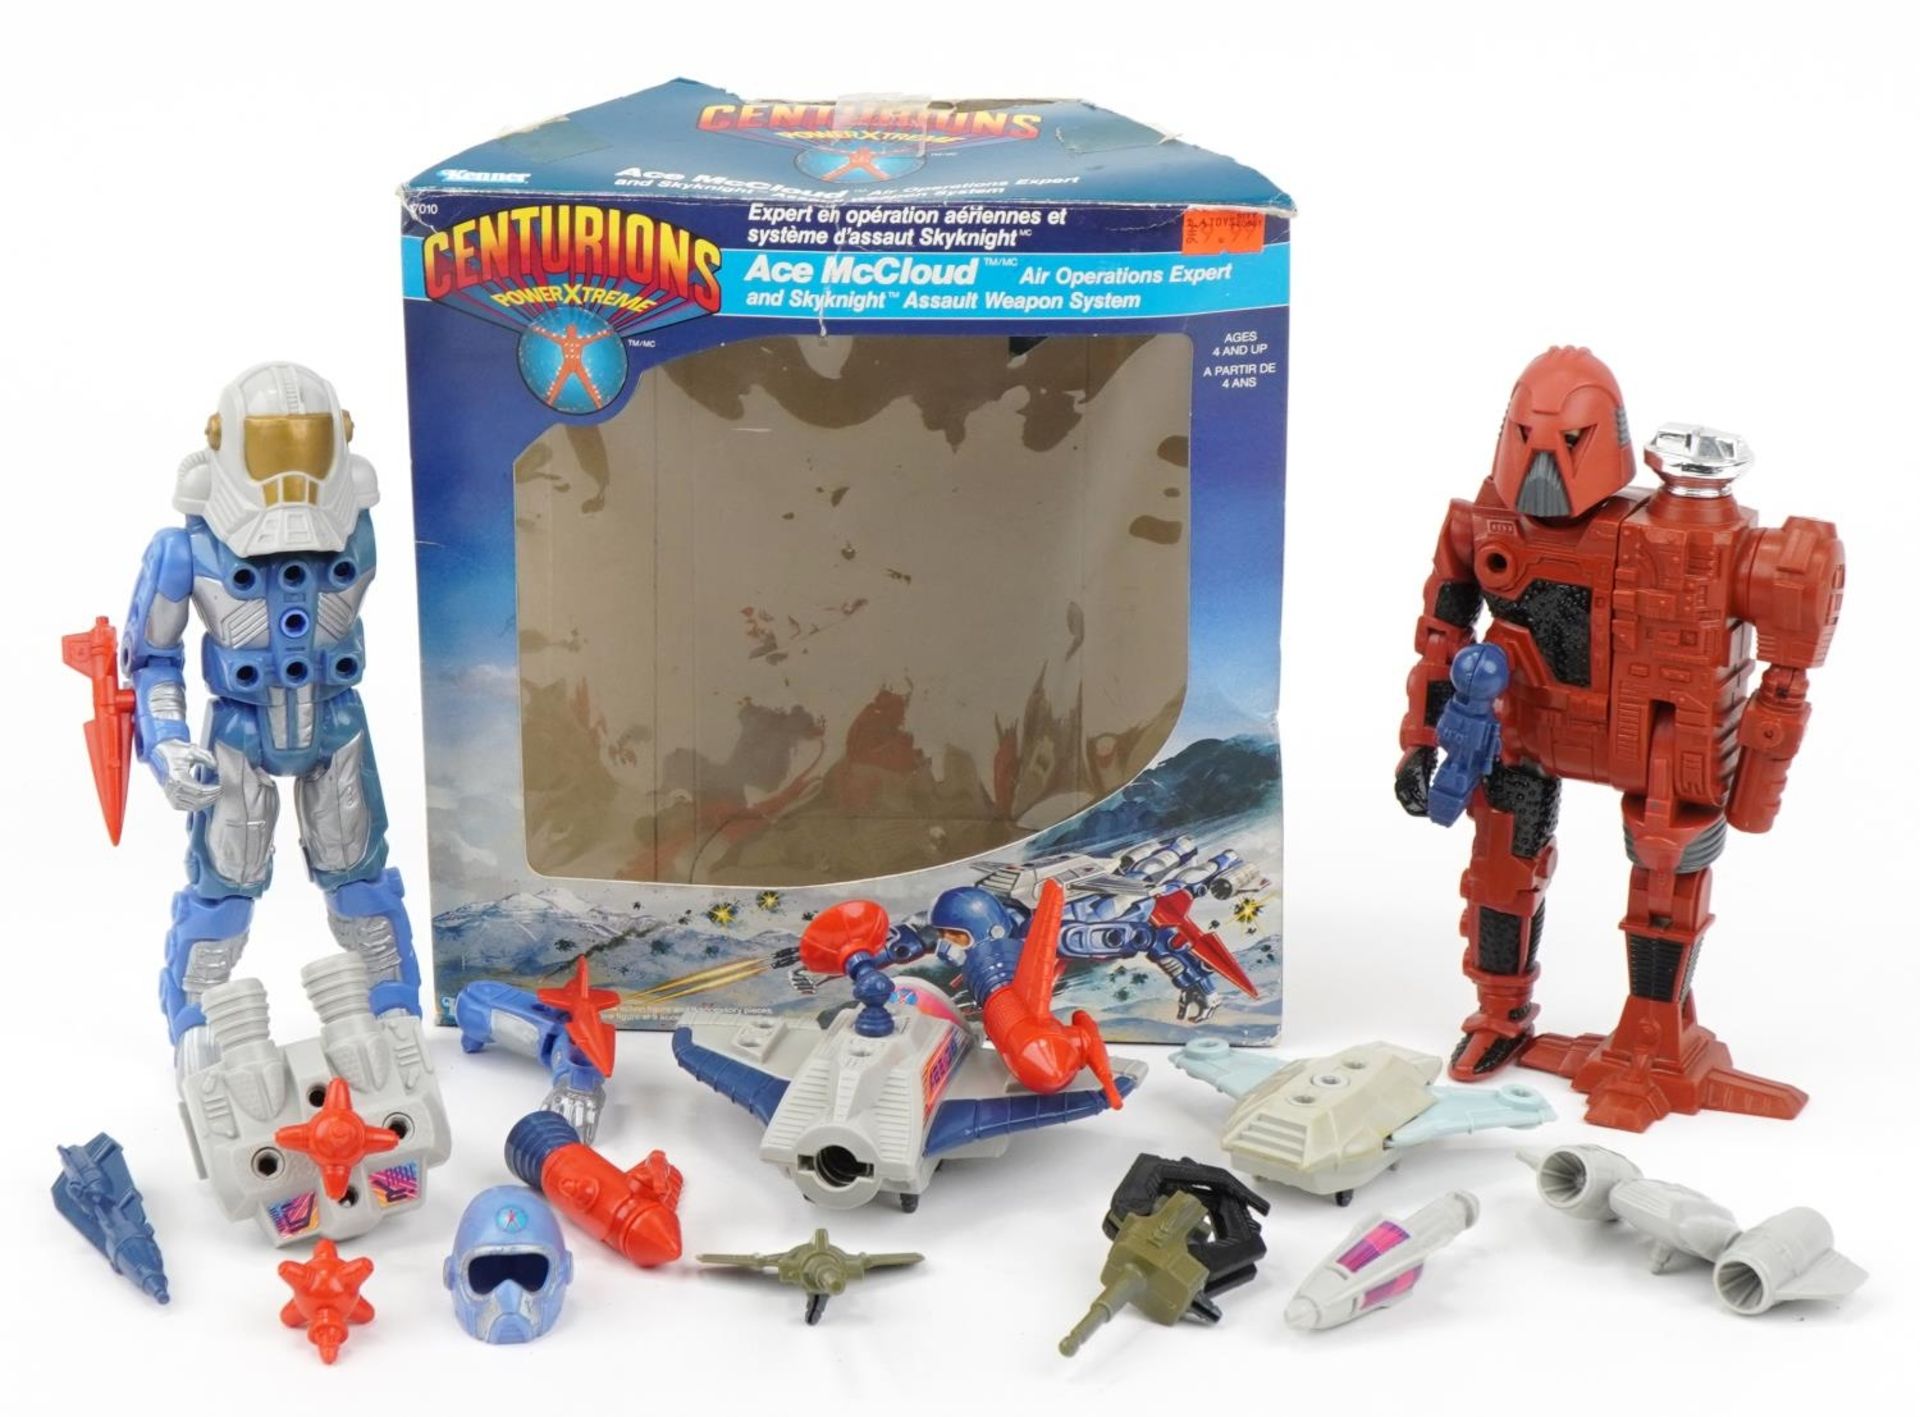 1986 Centurion's Ace McCloud and Skyknight action figure set with box by Kenner